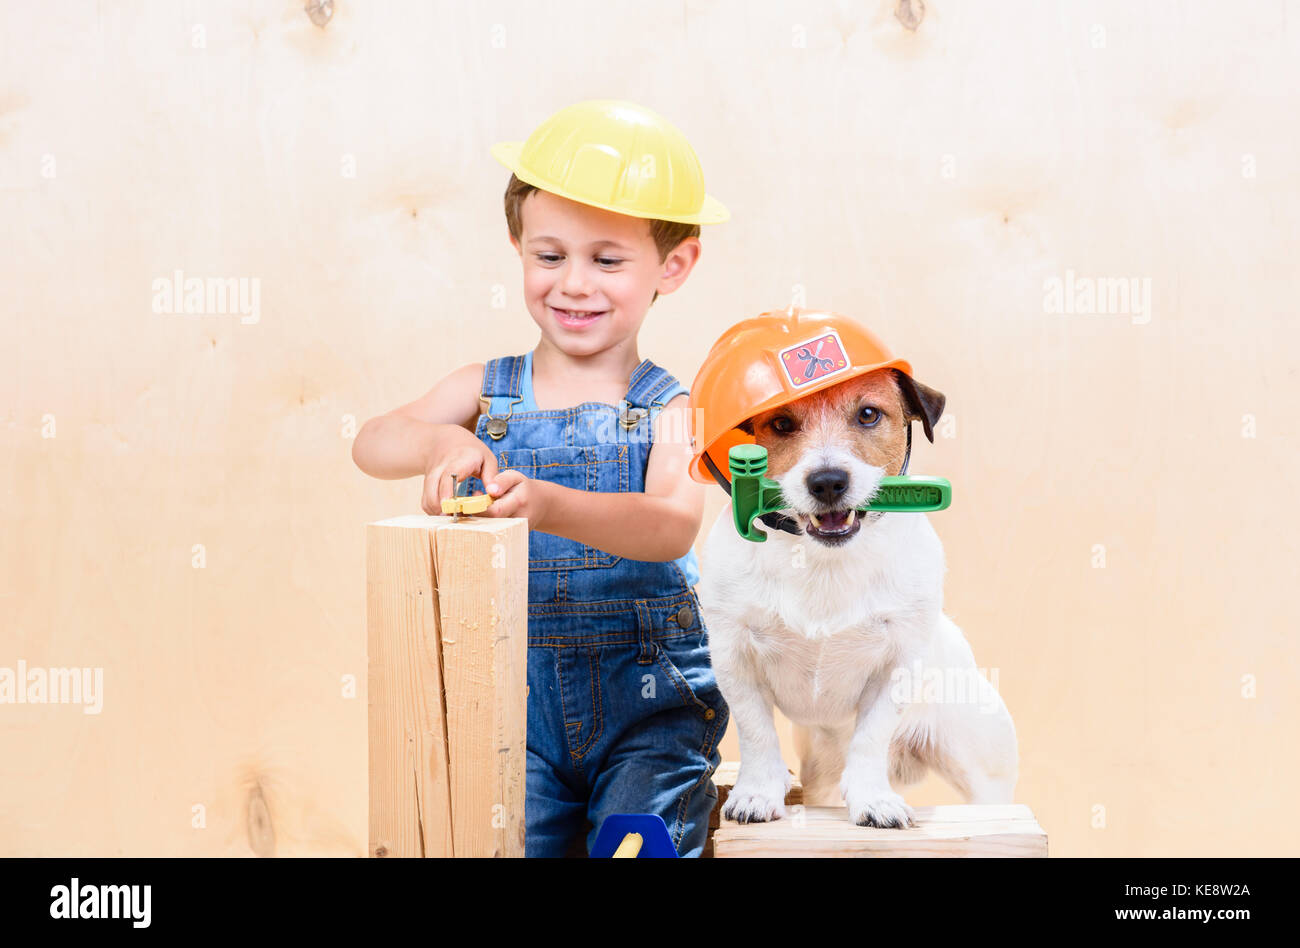 Kid and his pet at construction site working as builders Stock Photo